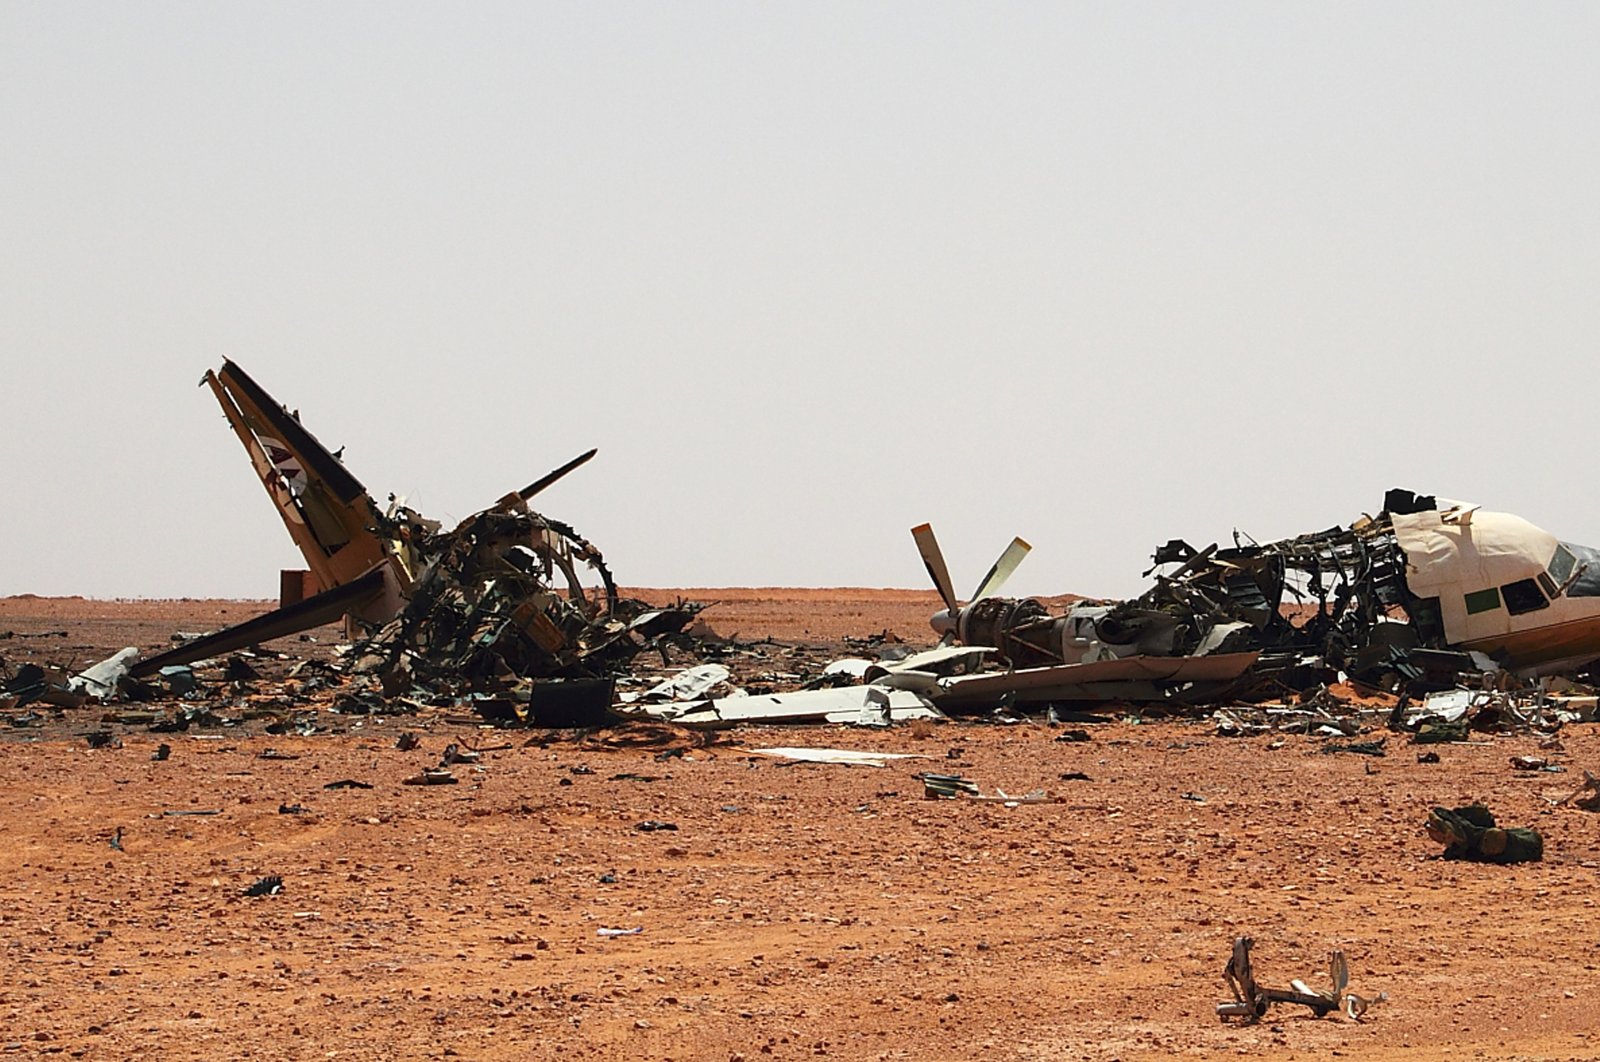 The wreckage of a plane is scattered in the desert outside a military base approximately 45 kilometers outside of Bani Walid, Libya, Saturday, Sept. 3, 2011. (AP File Photo)